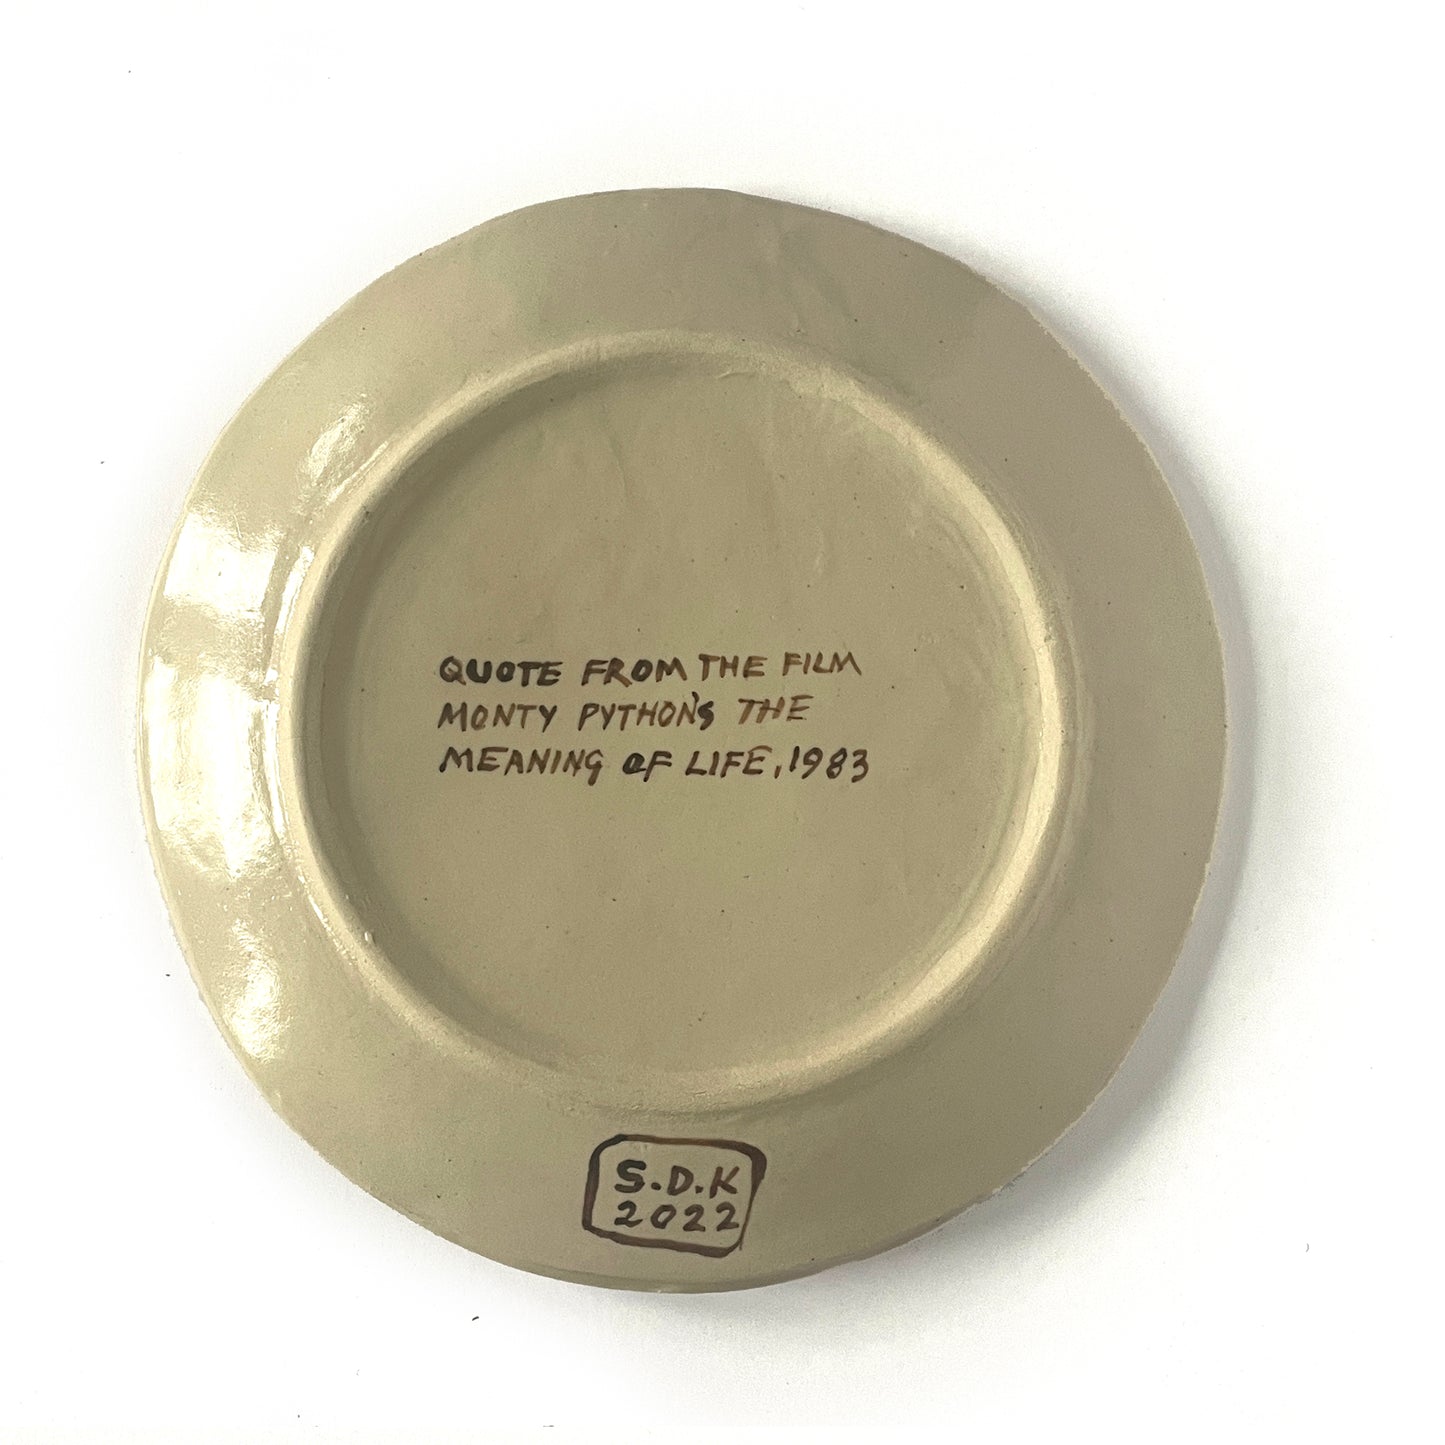 Monty Python – 'It's Only Wafer Thin' Plate reverse